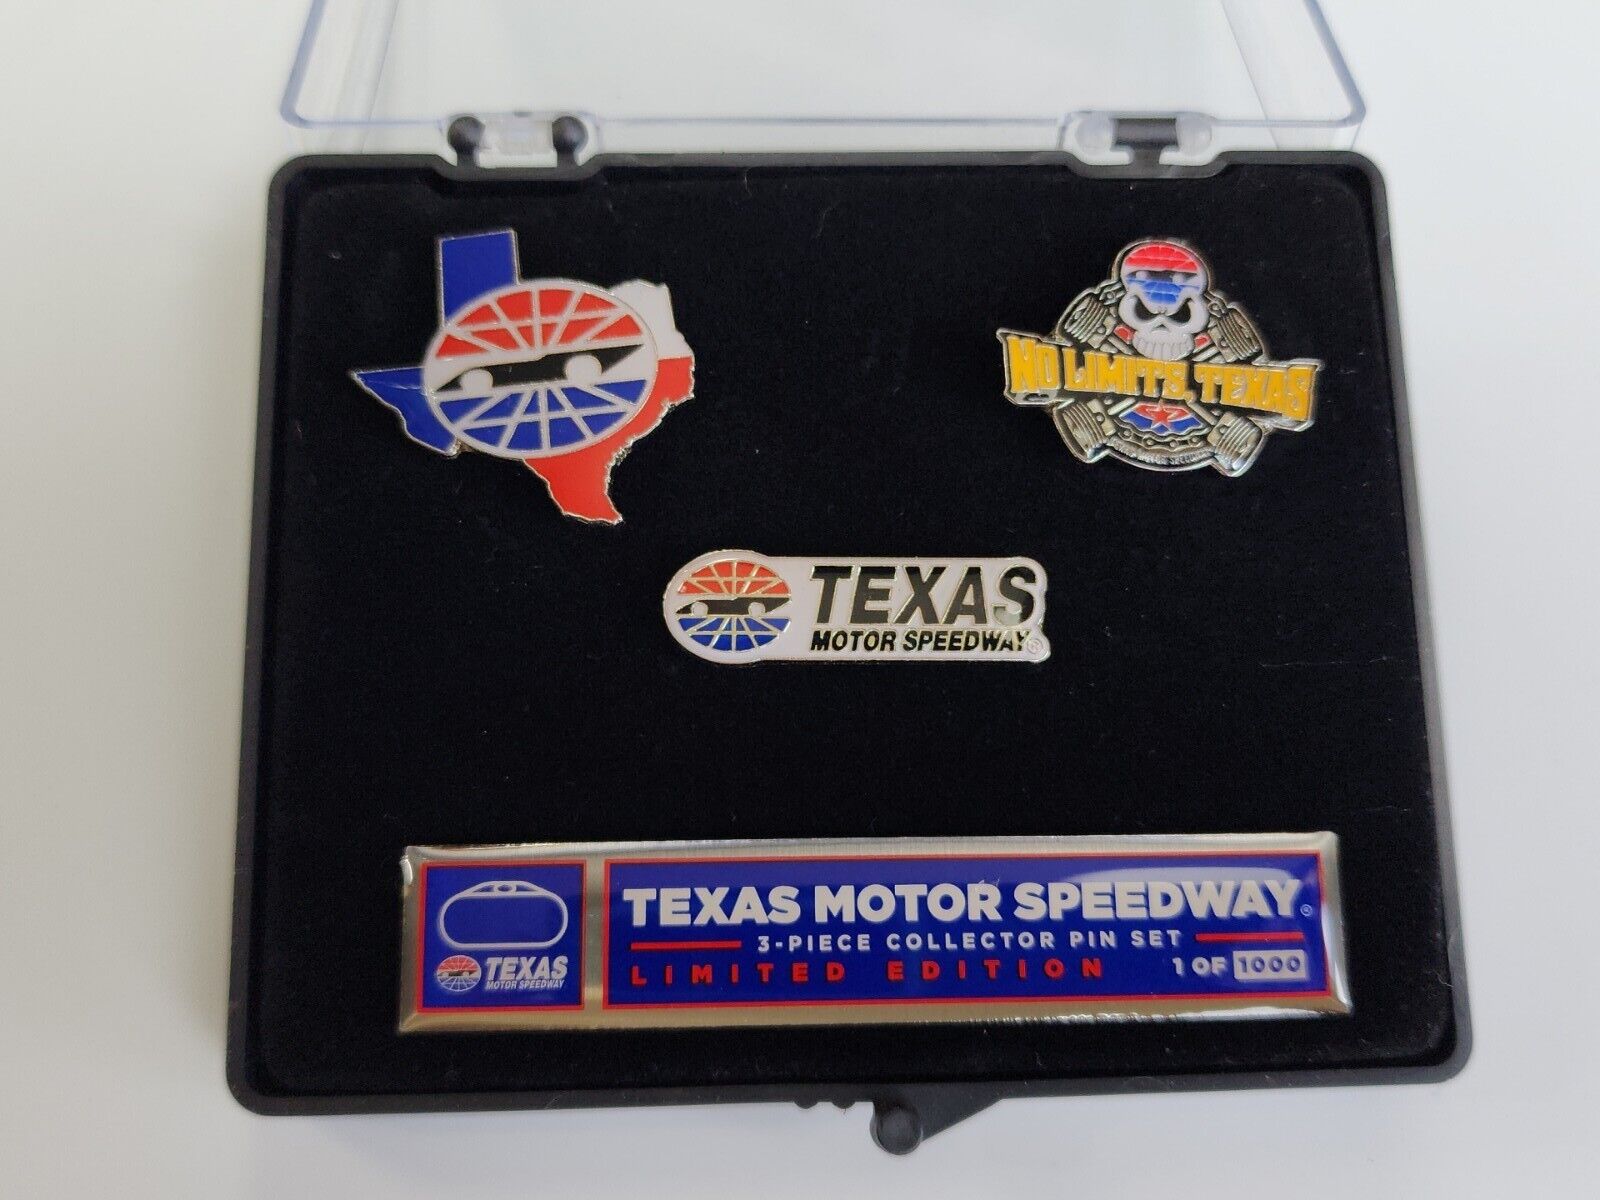 Texas Motor Speedway 3 Piece Pin Set Special Edition 1 of 1000